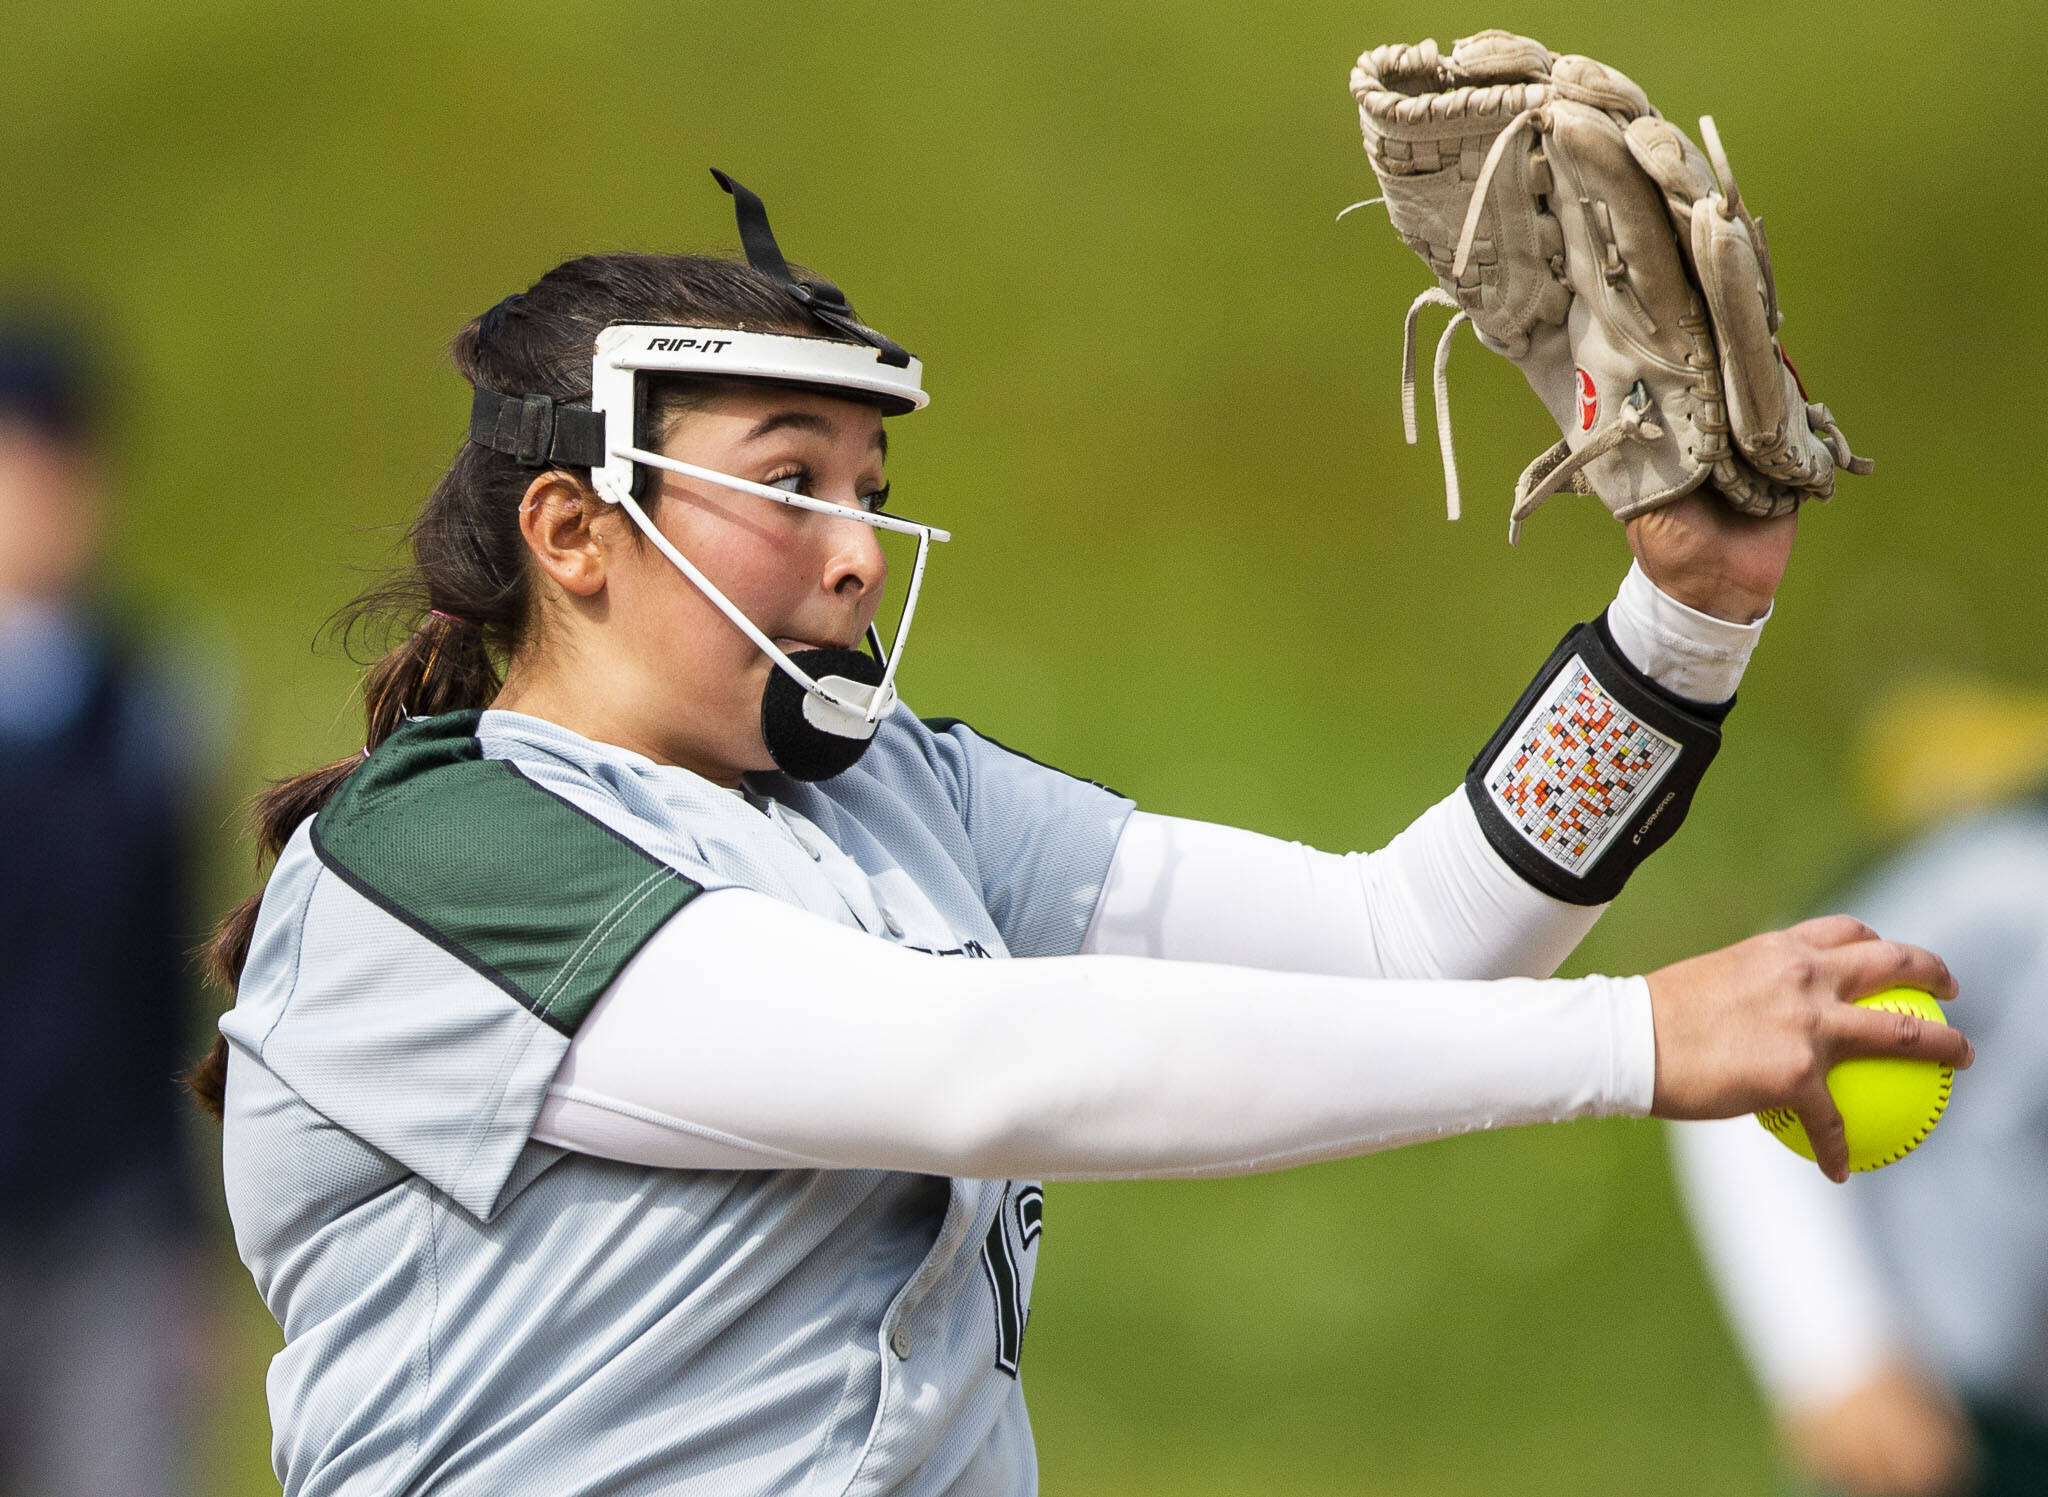 Jackson’s Yanina Sherwood pitches during a game against Glacier Peak on April 28, 2022 in Everett. (Olivia Vanni / The Herald)